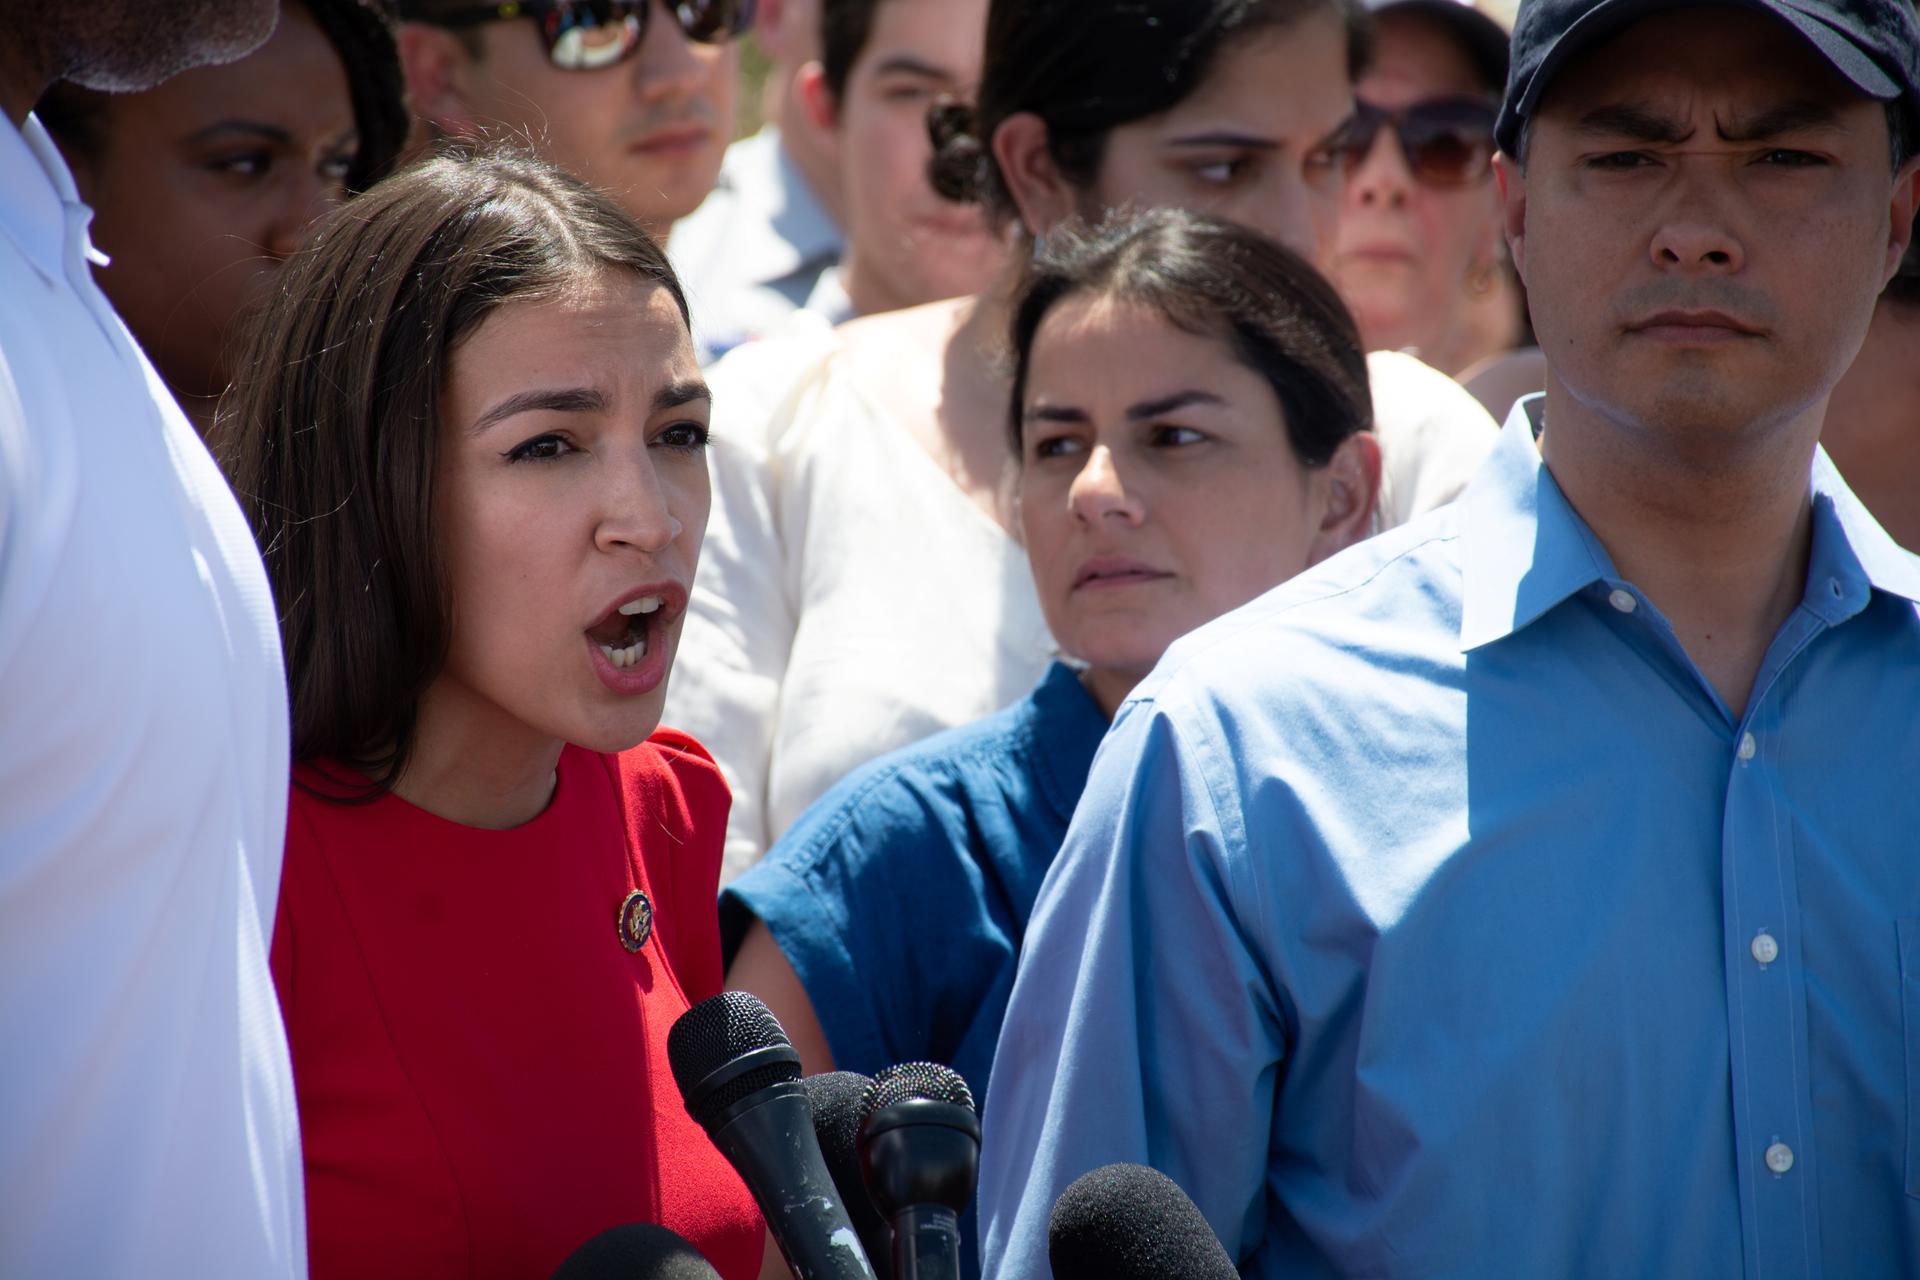 U.S. Representative Alexandria Ocasio-Cortez, standing near Rep. Joaquin Castro, speaks to the news media after she and other members of Congress toured two Border patrol stations.